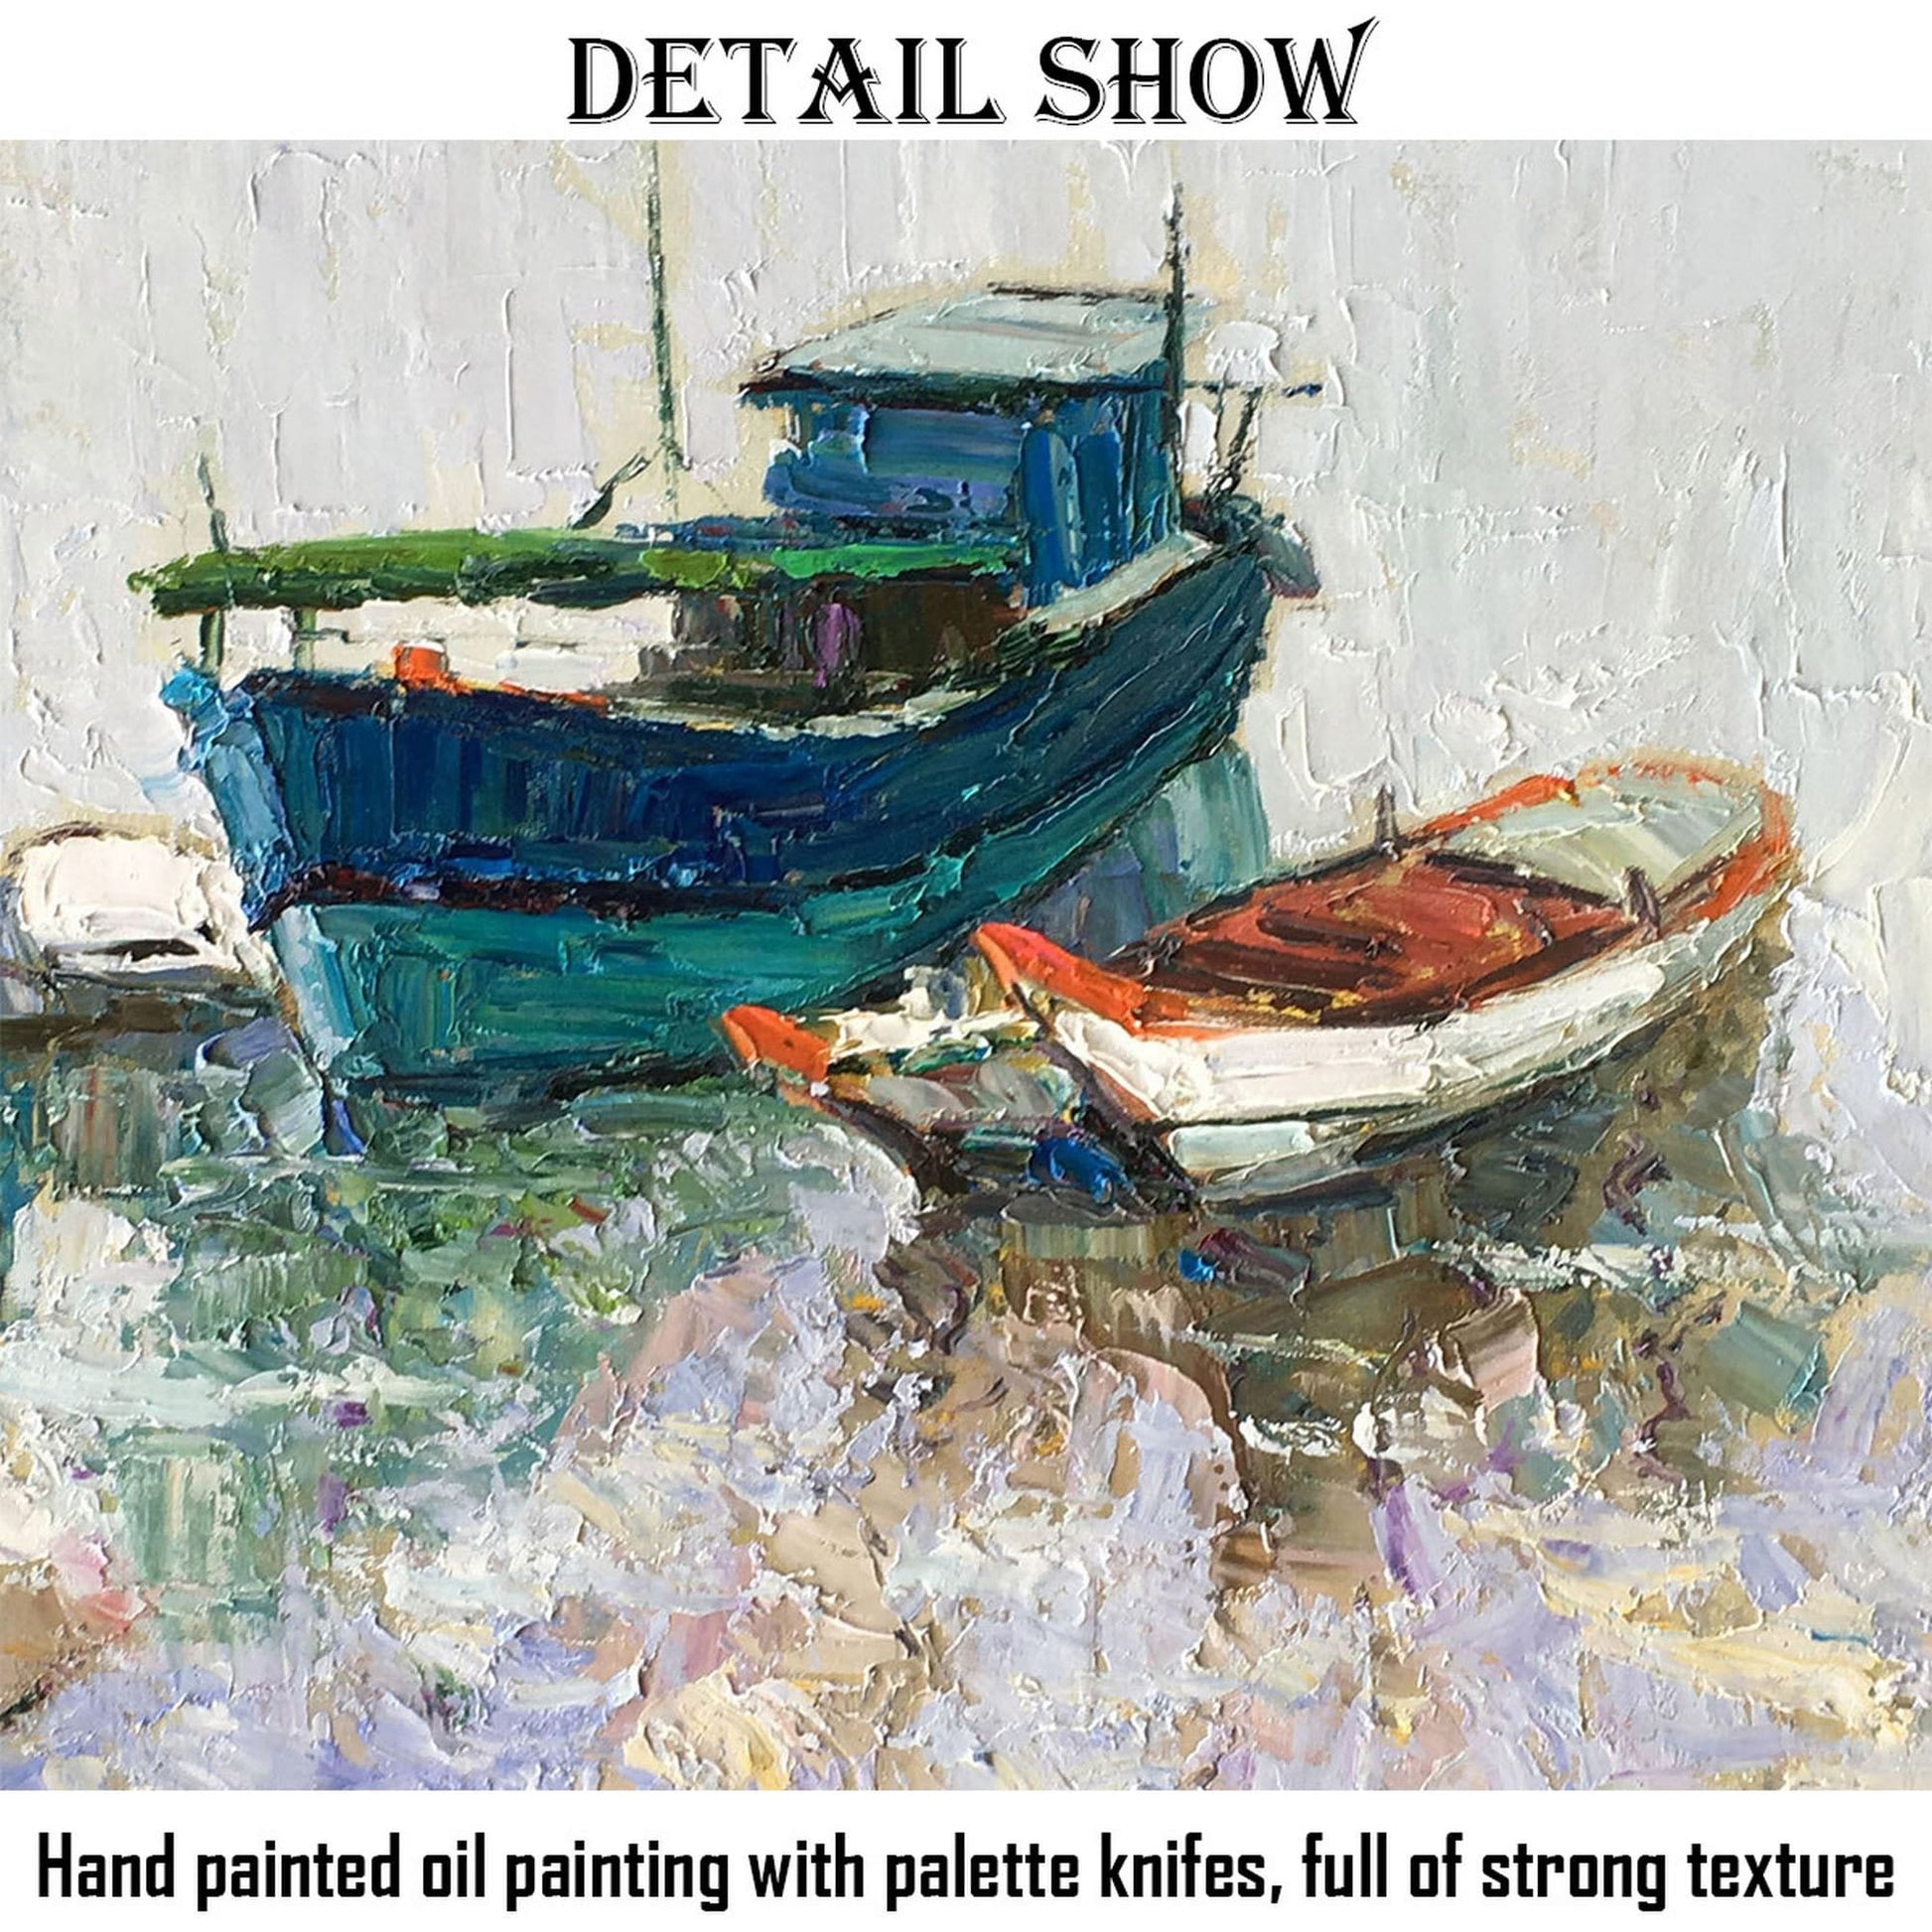 Original Oil Painting Fishing Boats Seascape, Paintings On Canvas, Oversized Painting, Handmade, Modern Painting, Impasto Painting